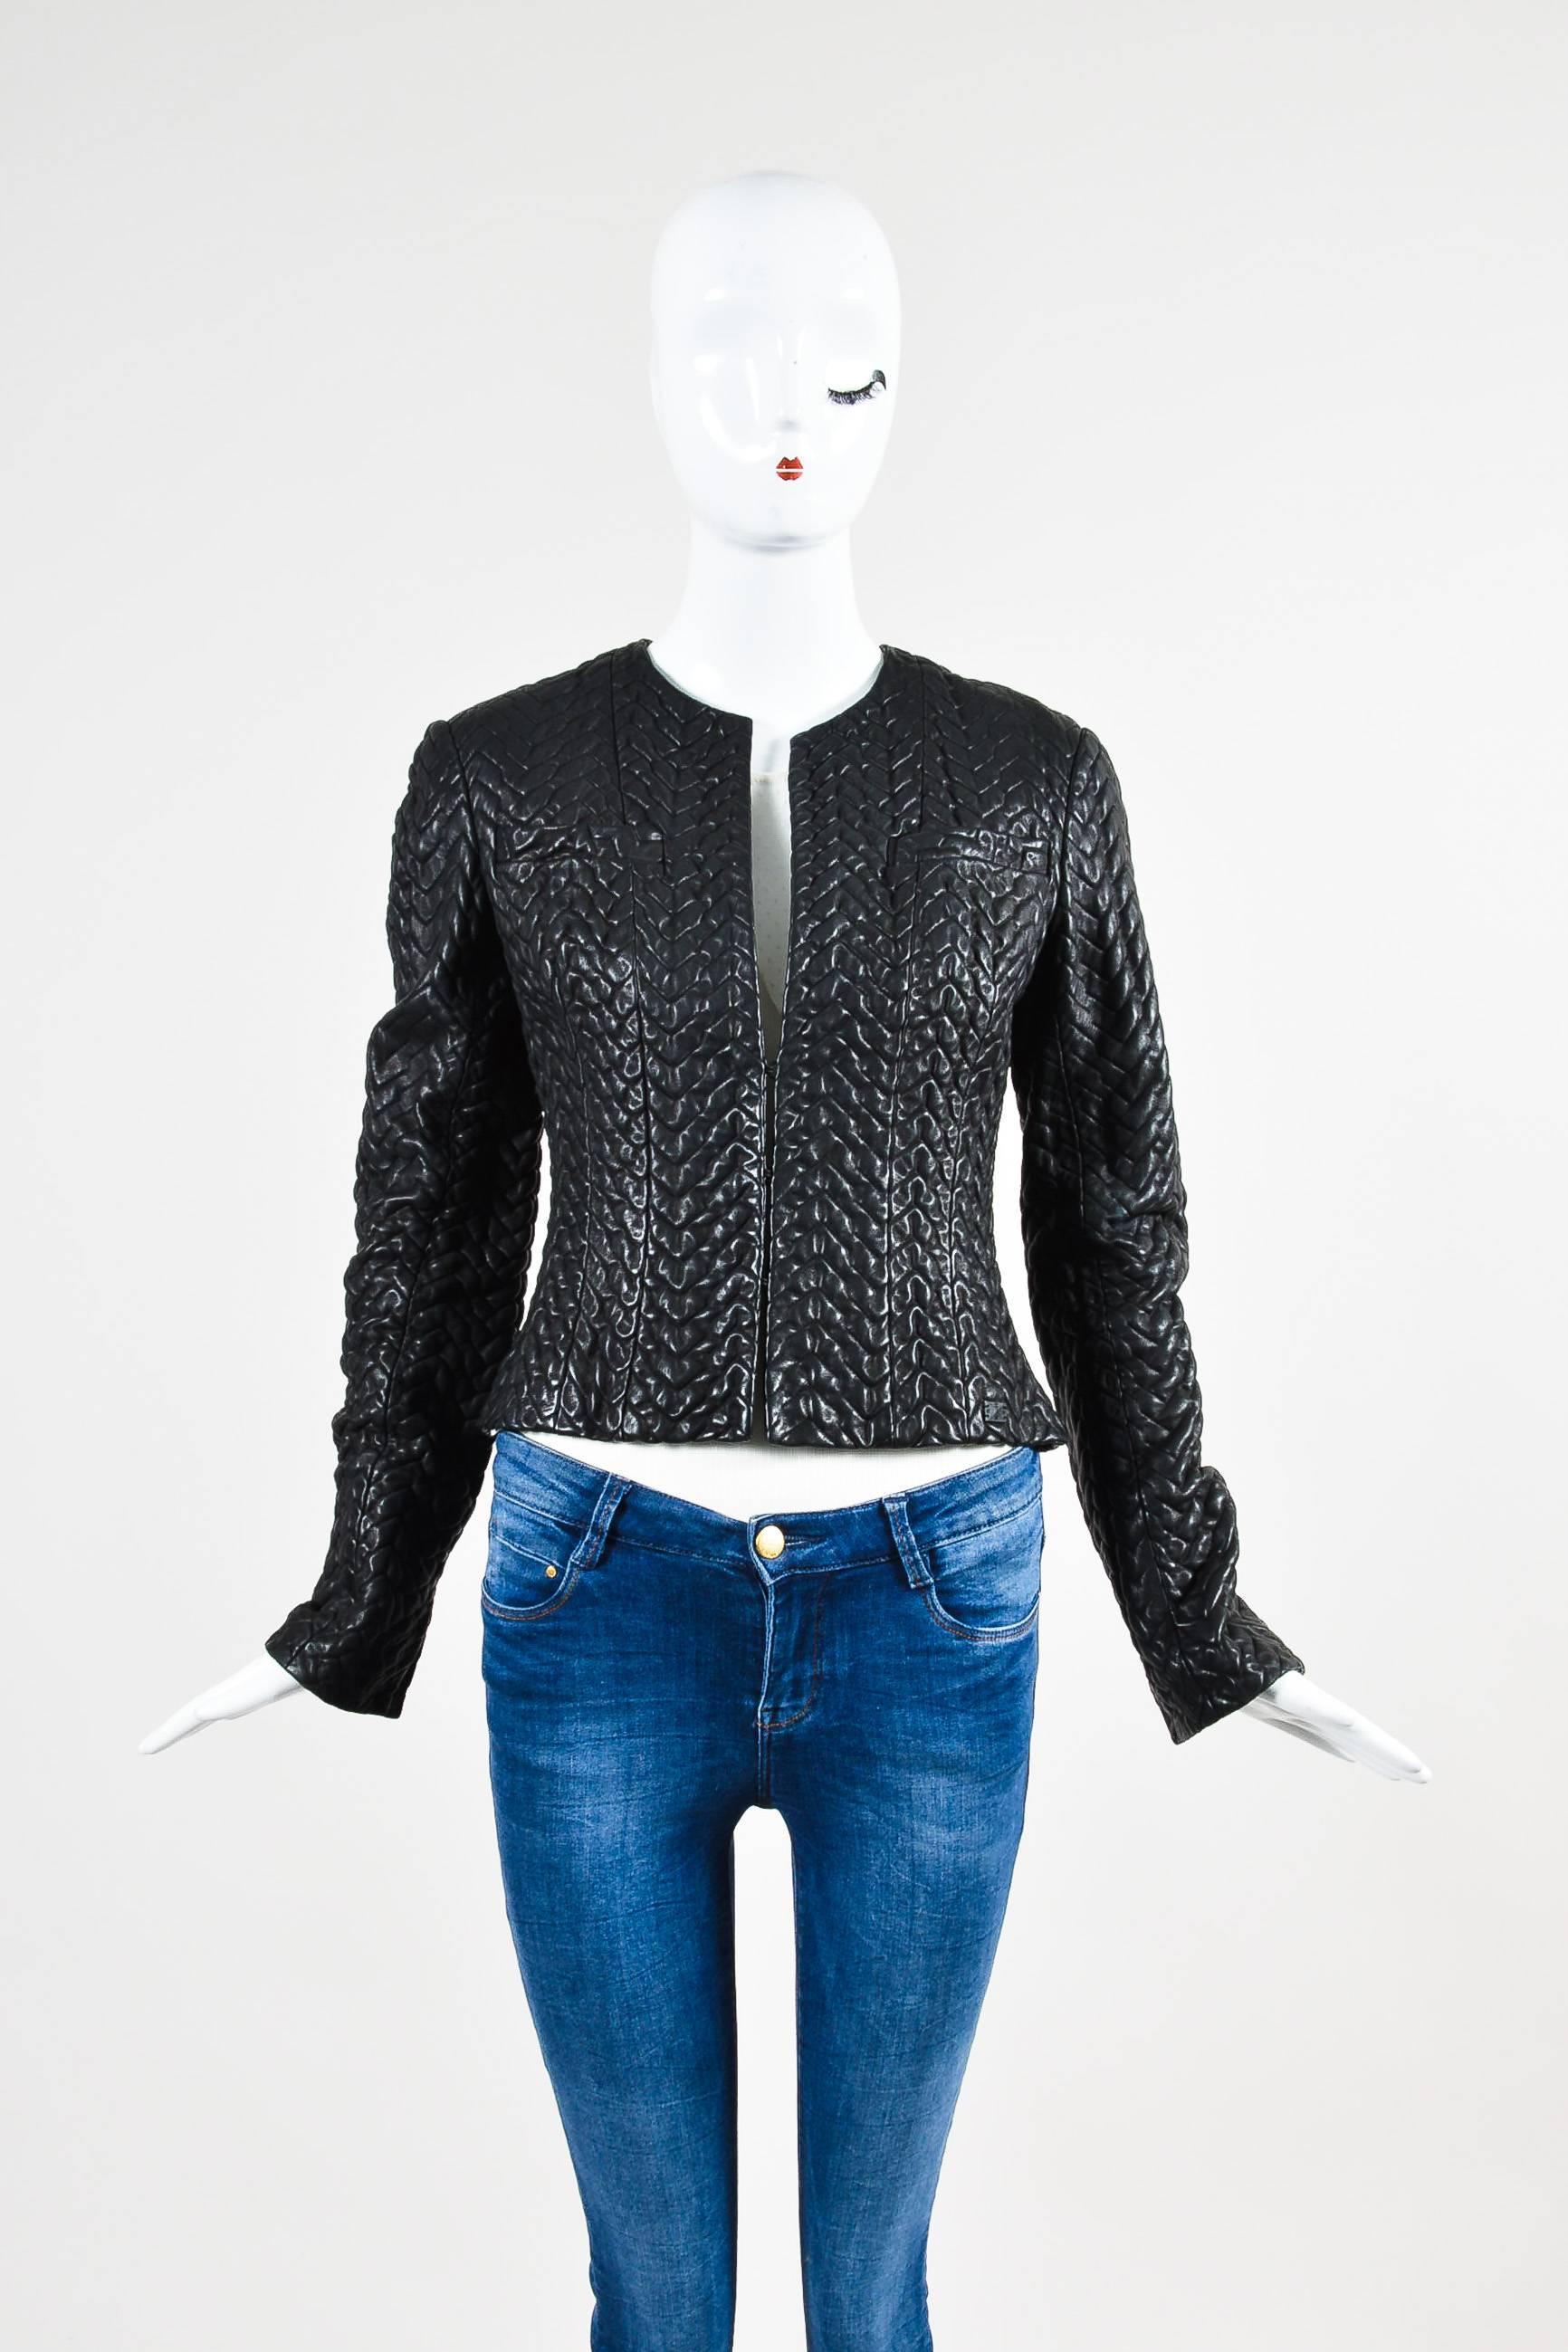 Retails at $3865. Black long sleeve textured leather Chanel cropped jacket featuring two chest pockets and slits at sleeve openings. Three hook and bar closures. Lined.

Additional Measurements:
Sleeve Length: 25